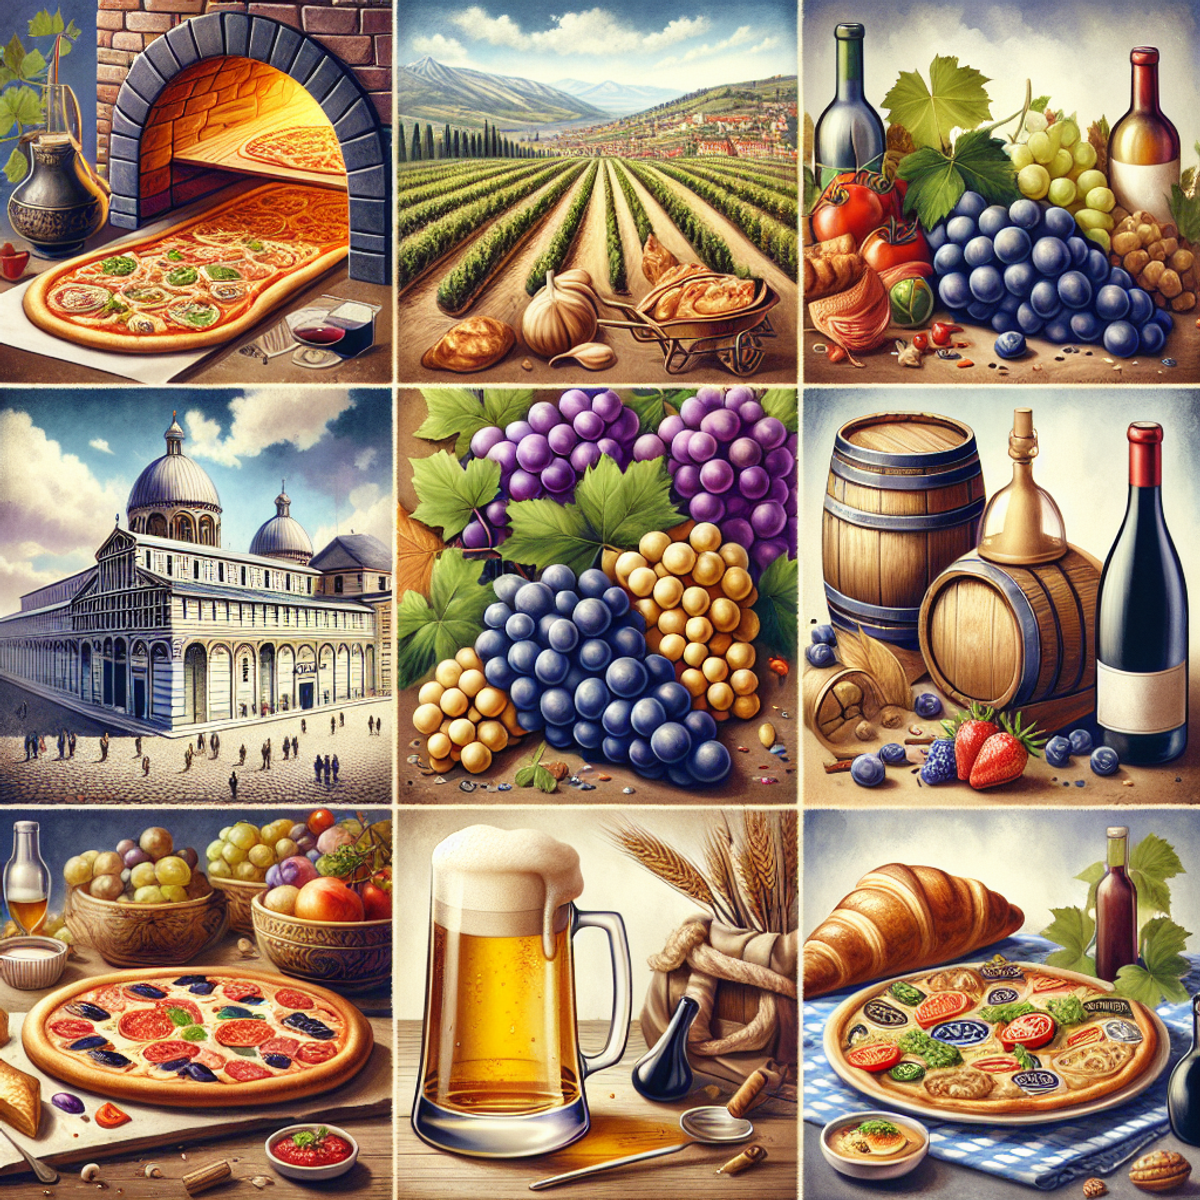 A wooden, brick oven for Italian pizza making, plump grapes and a wine bottle representing France's vineyards, a large beer stein showcasing Germany's brewing culture, and a plate of tapas symbolizing Spain's dining tradition.